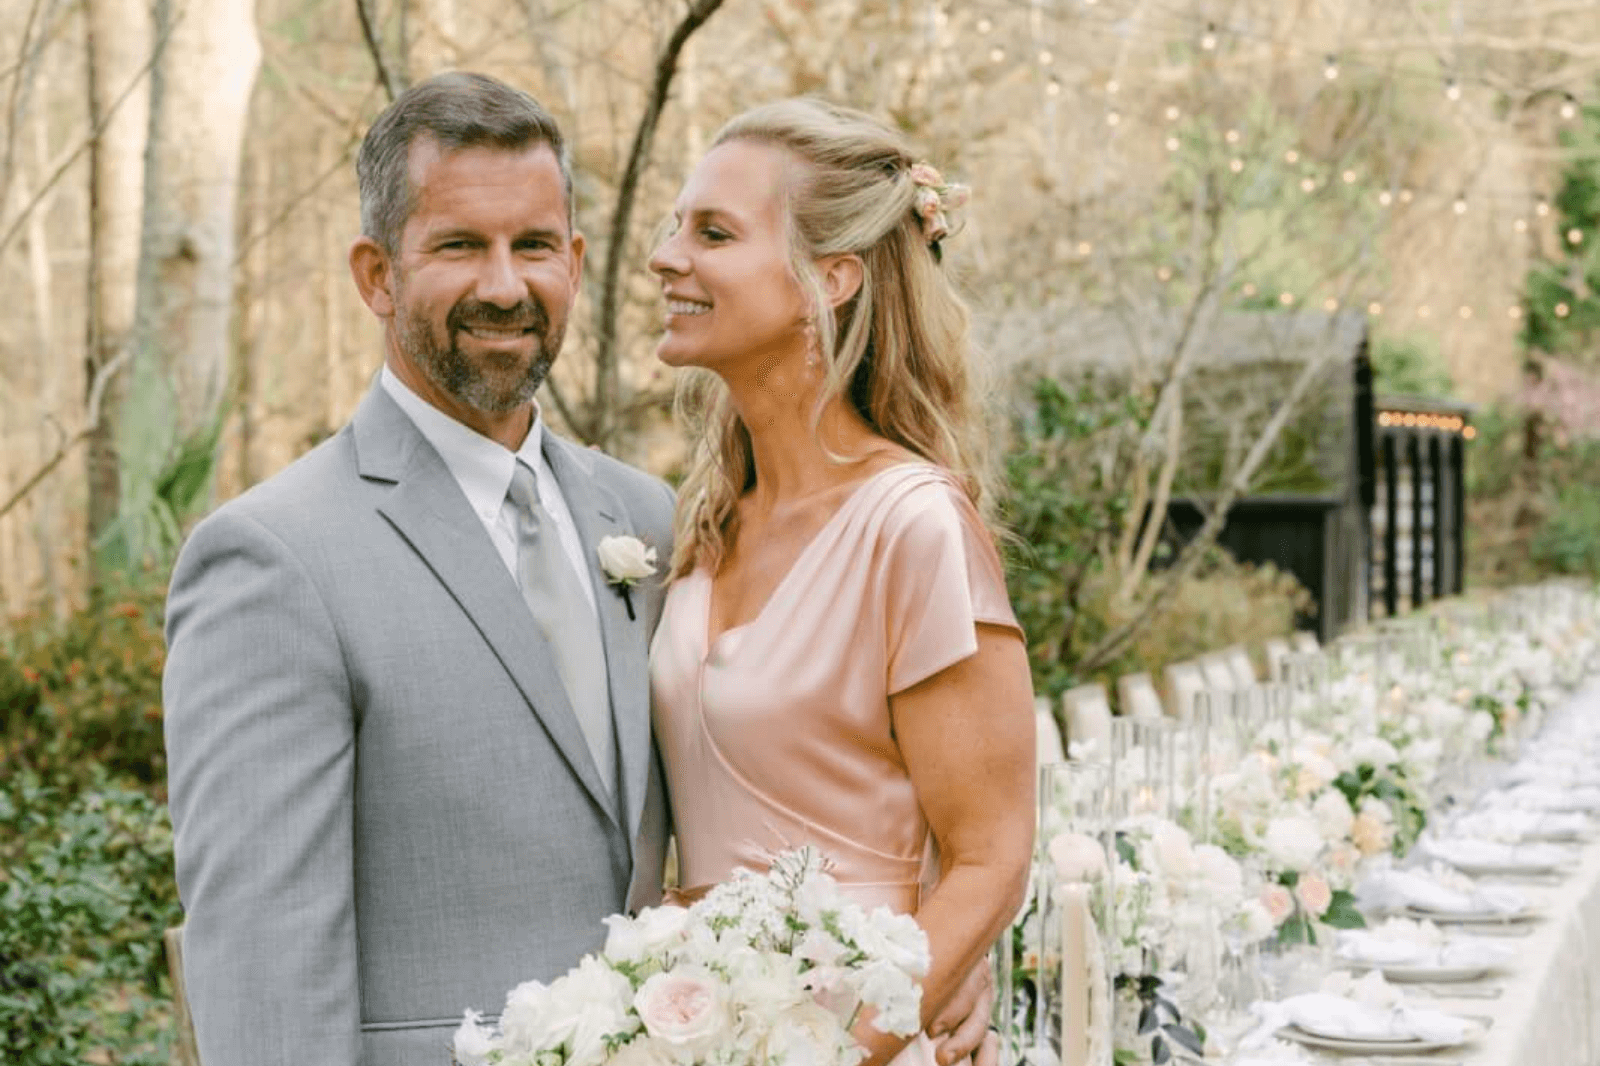 A Lowcountry Estate Wedding Tinted in Blush